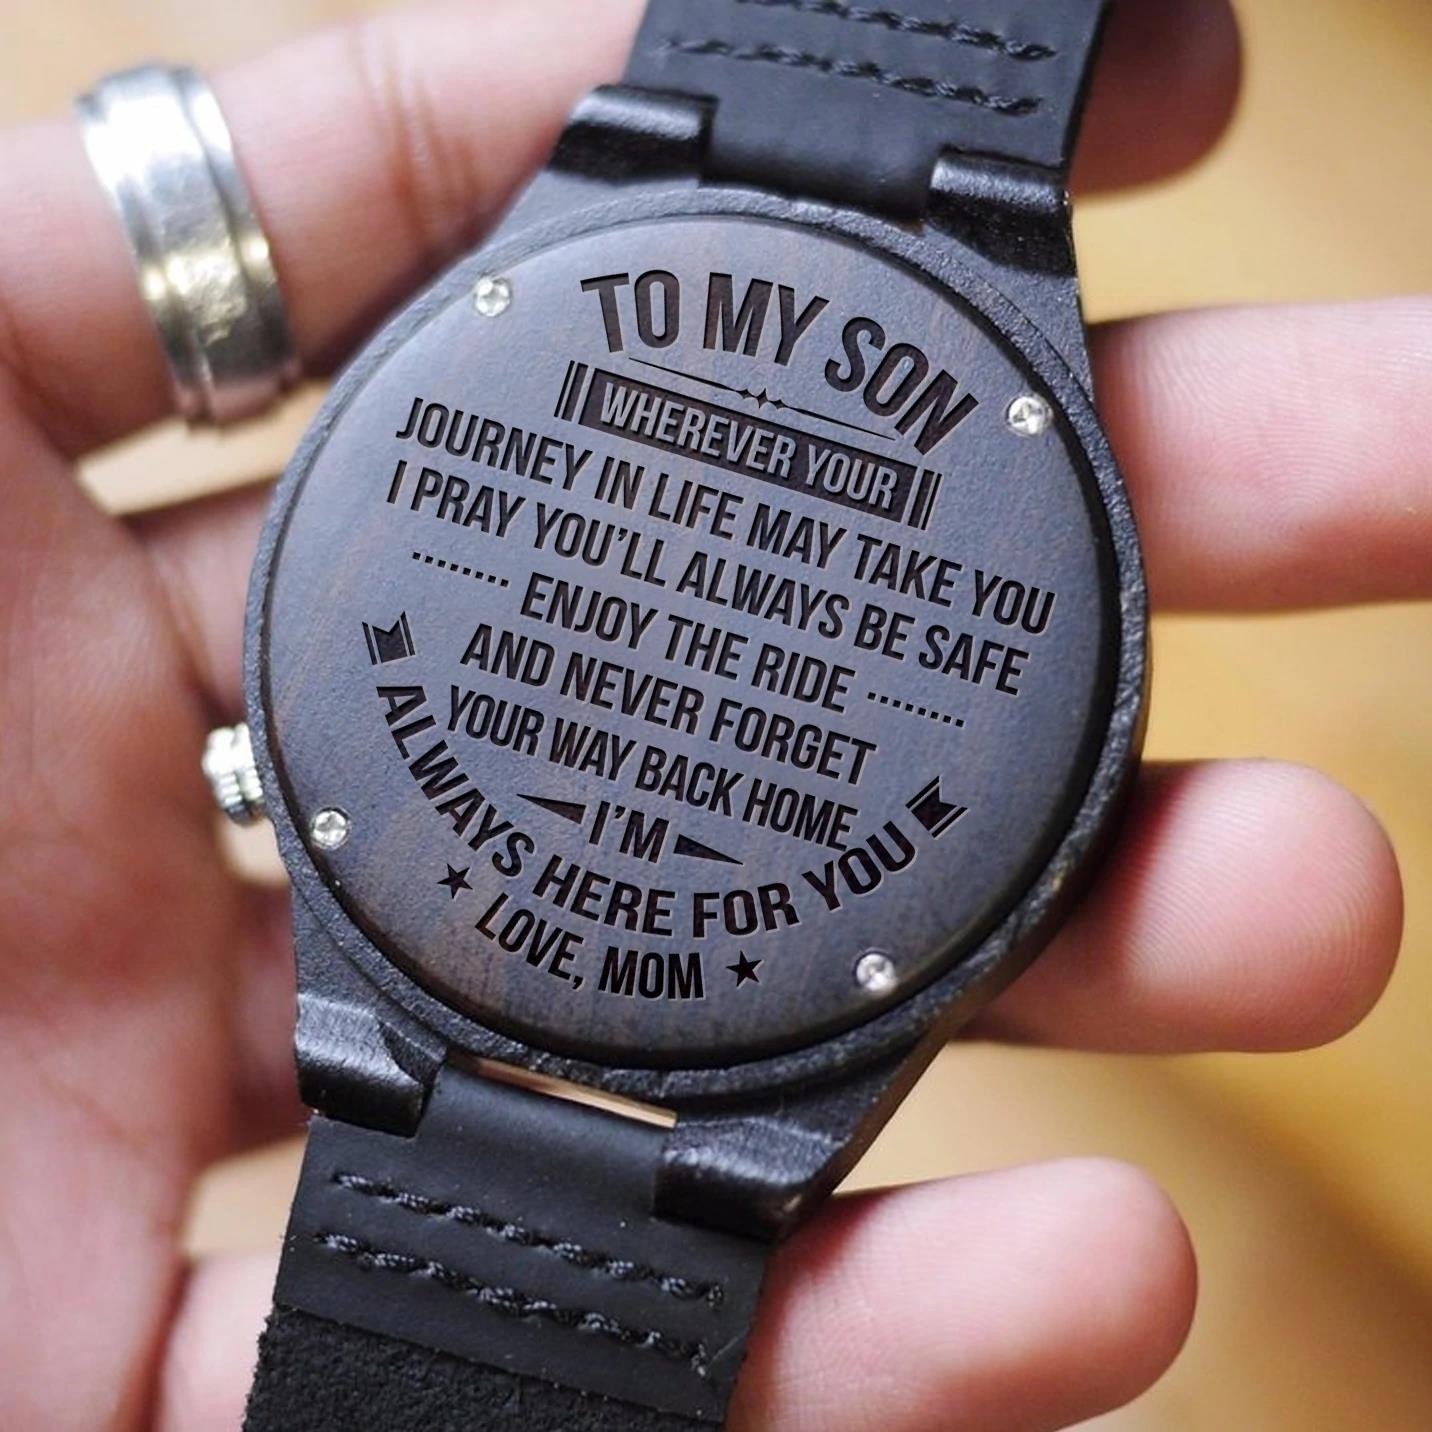 Wherever You Journey In Life May Take You Engraved Wooden Watch Gift For Son